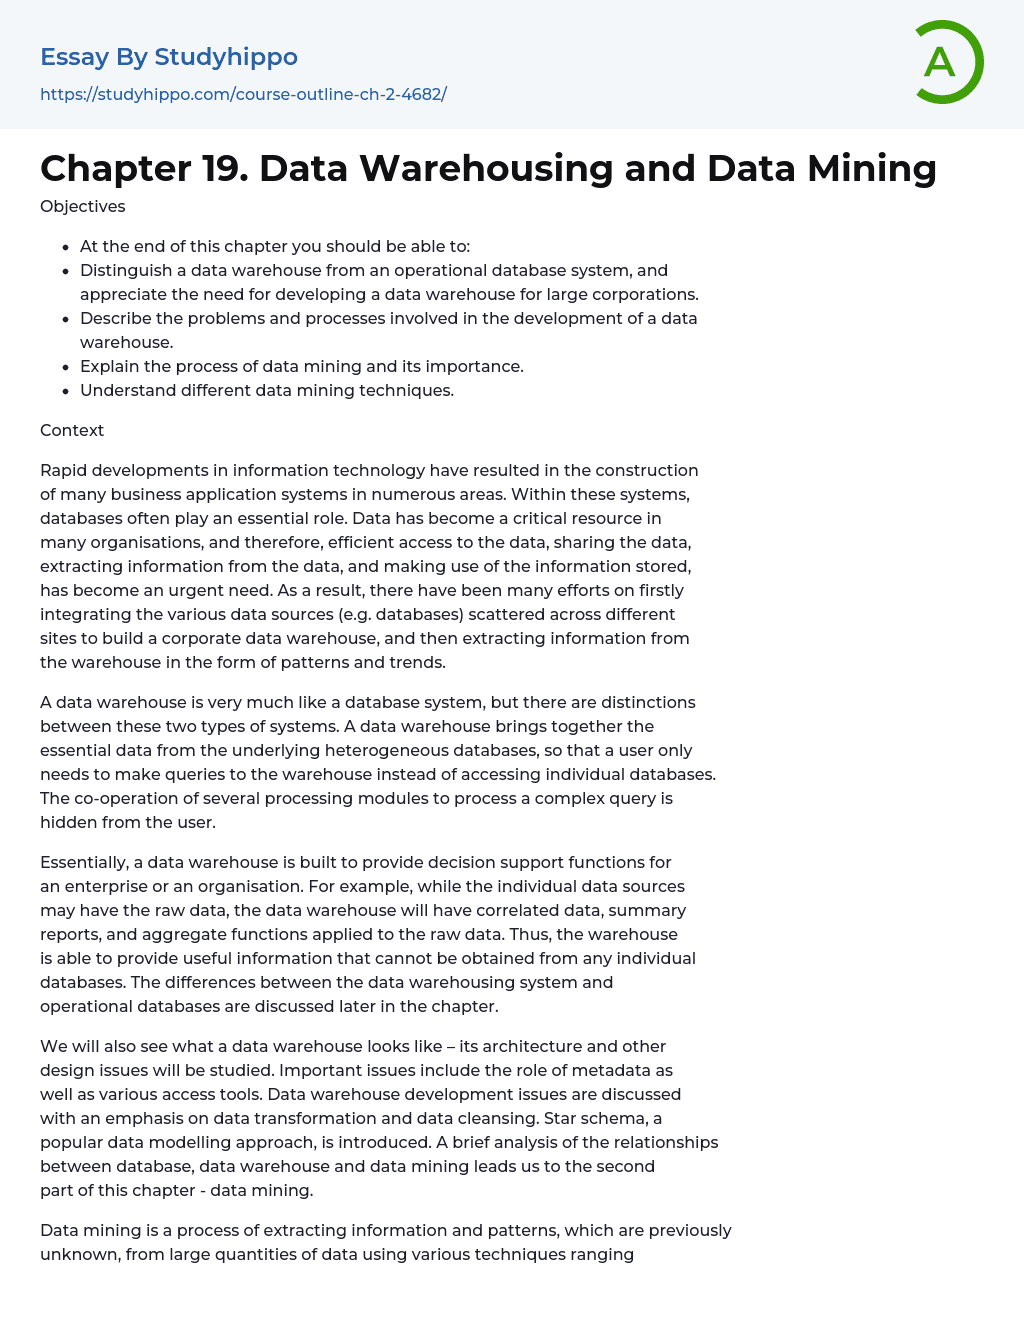 Chapter 19. Data Warehousing and Data Mining Essay Example